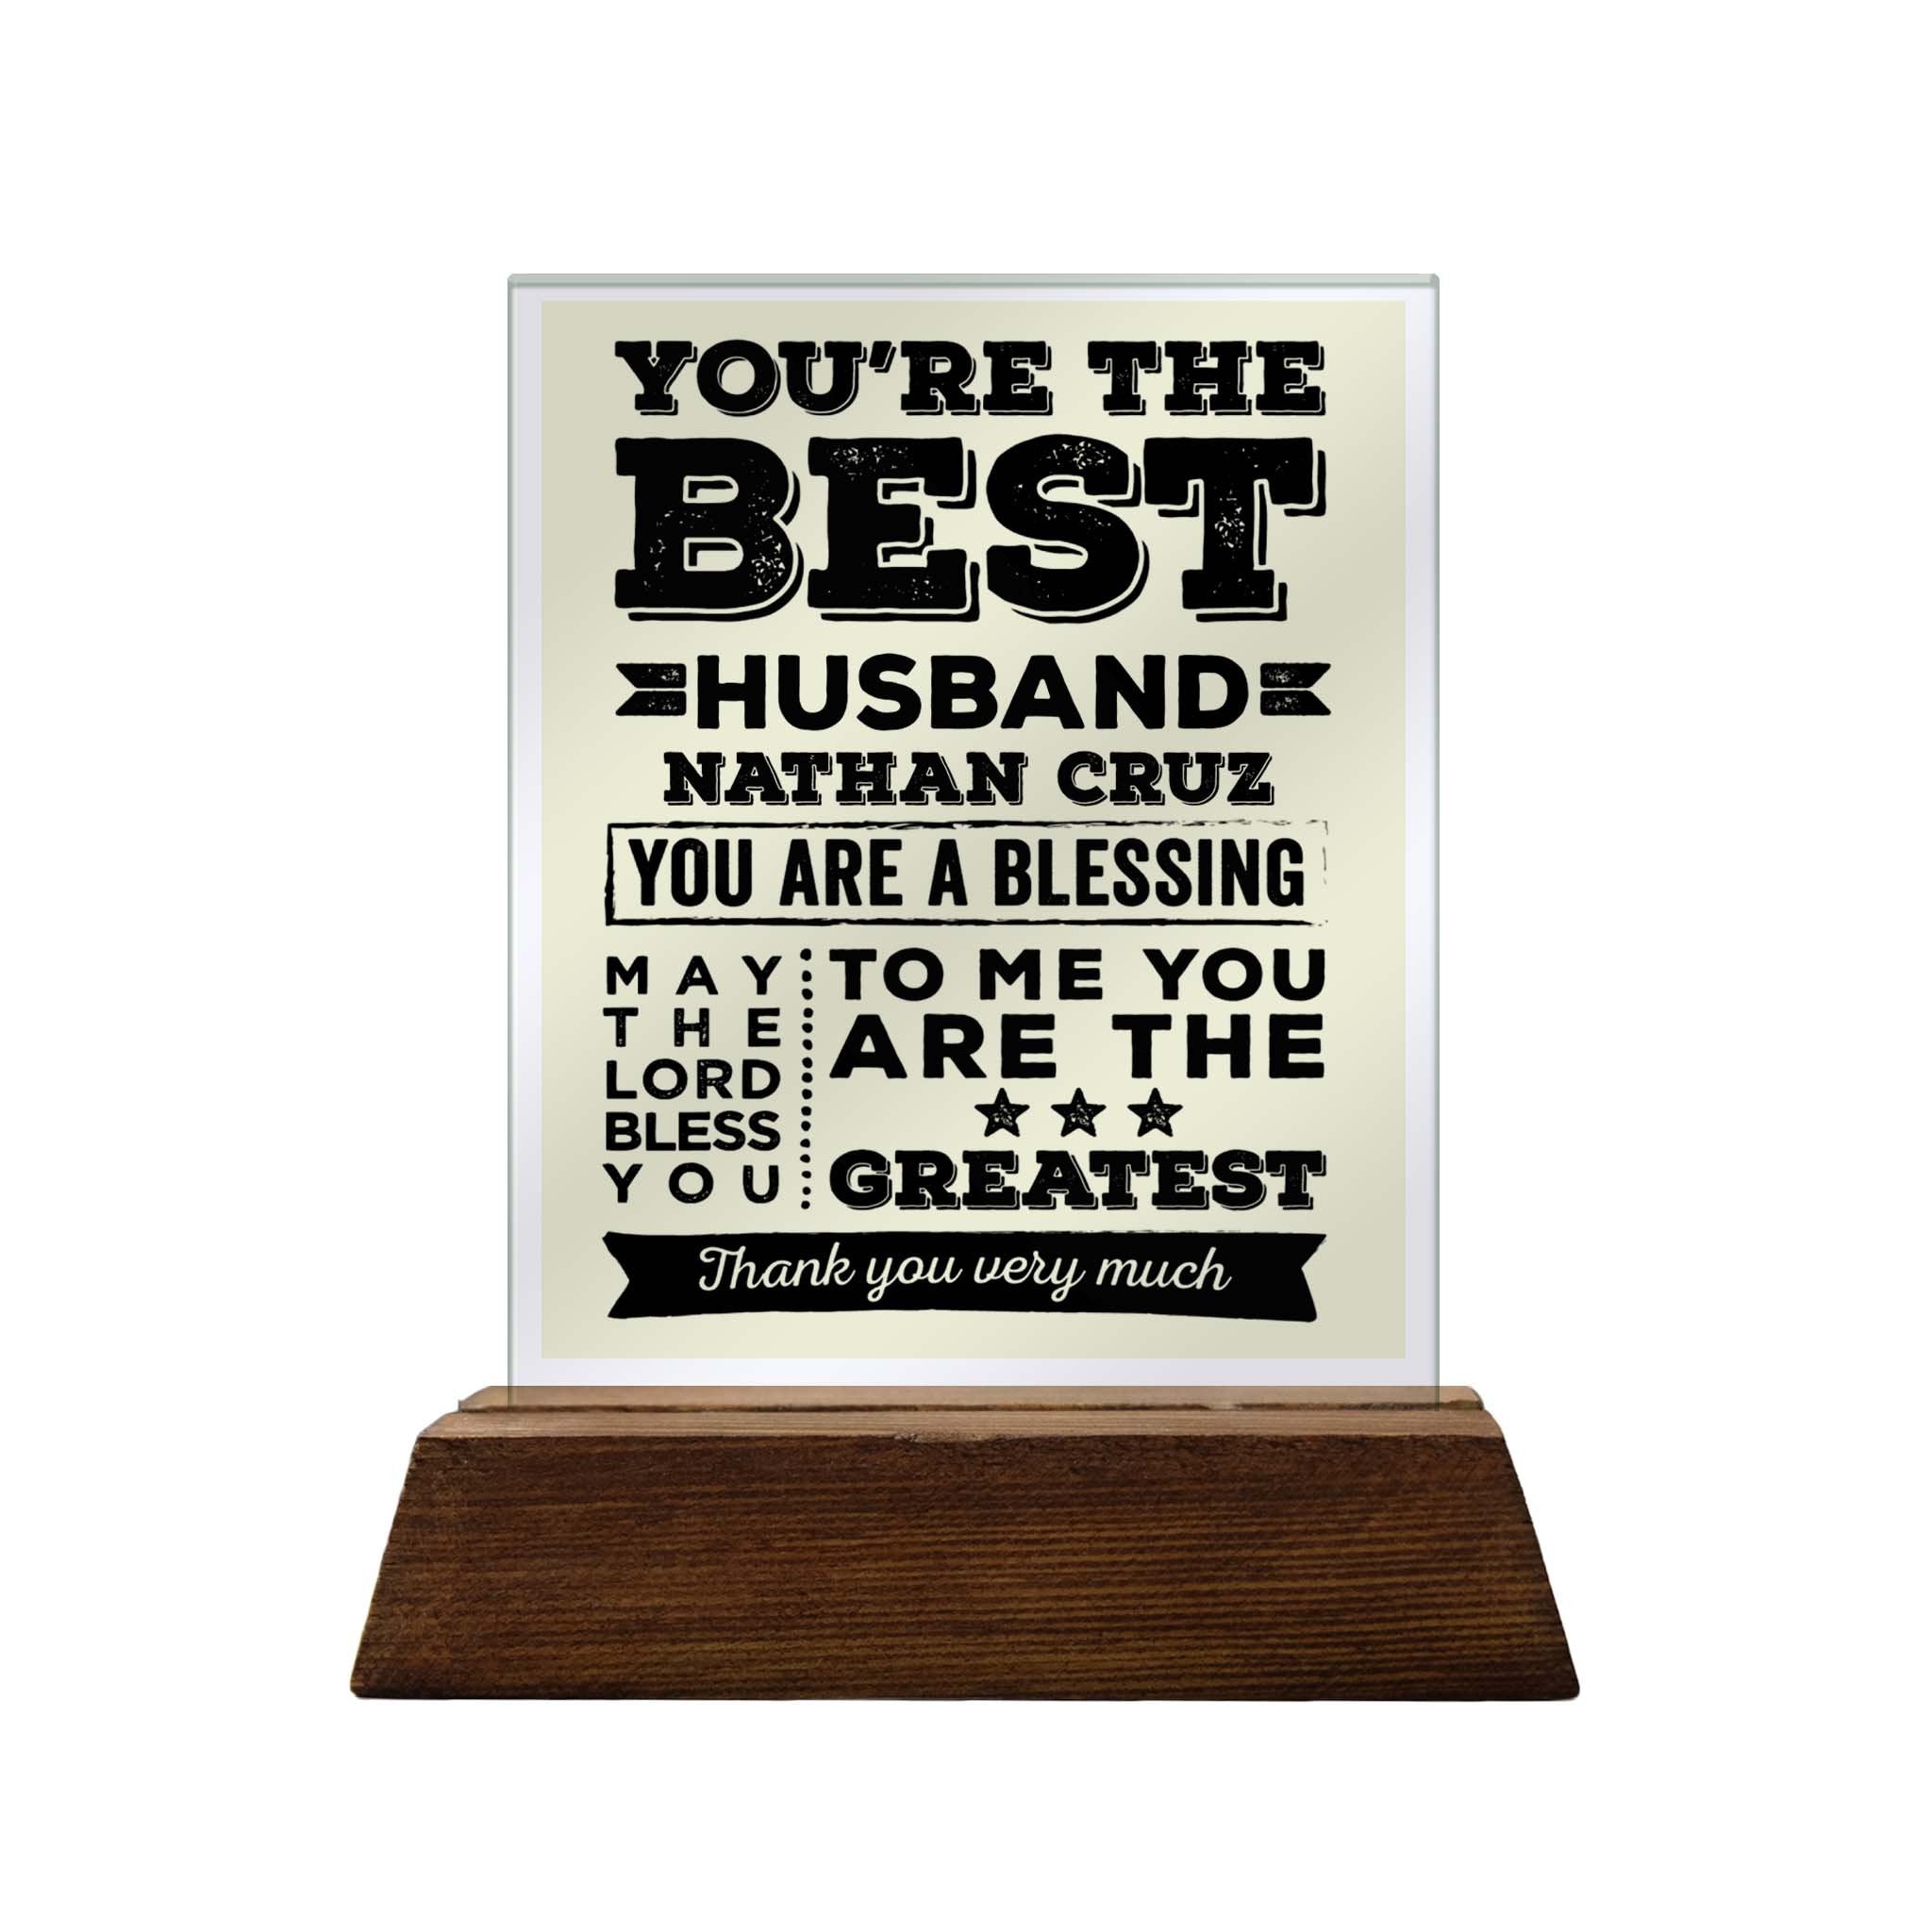 You're the Best Husband Glass Plaque